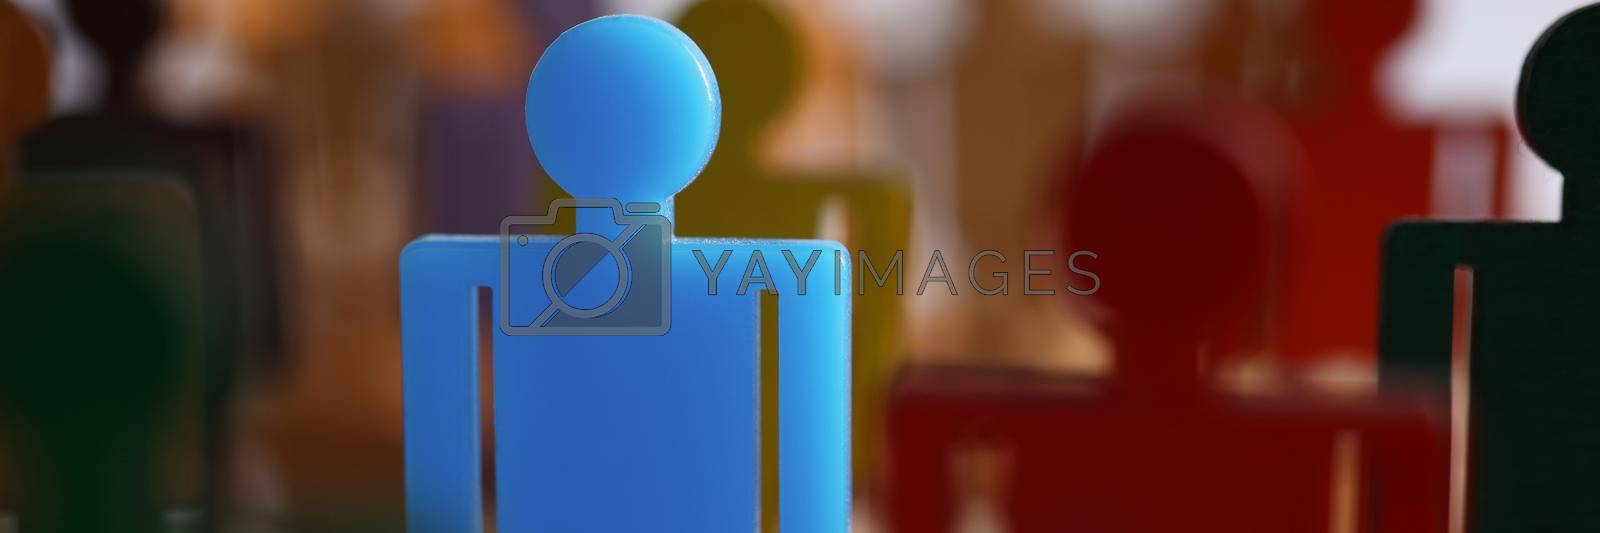 Close-up of one special guy talented businessman person among ordinary people. Unique blue figure in crowded place, stand out idea. Success, leader, career growth concept. Blurred background